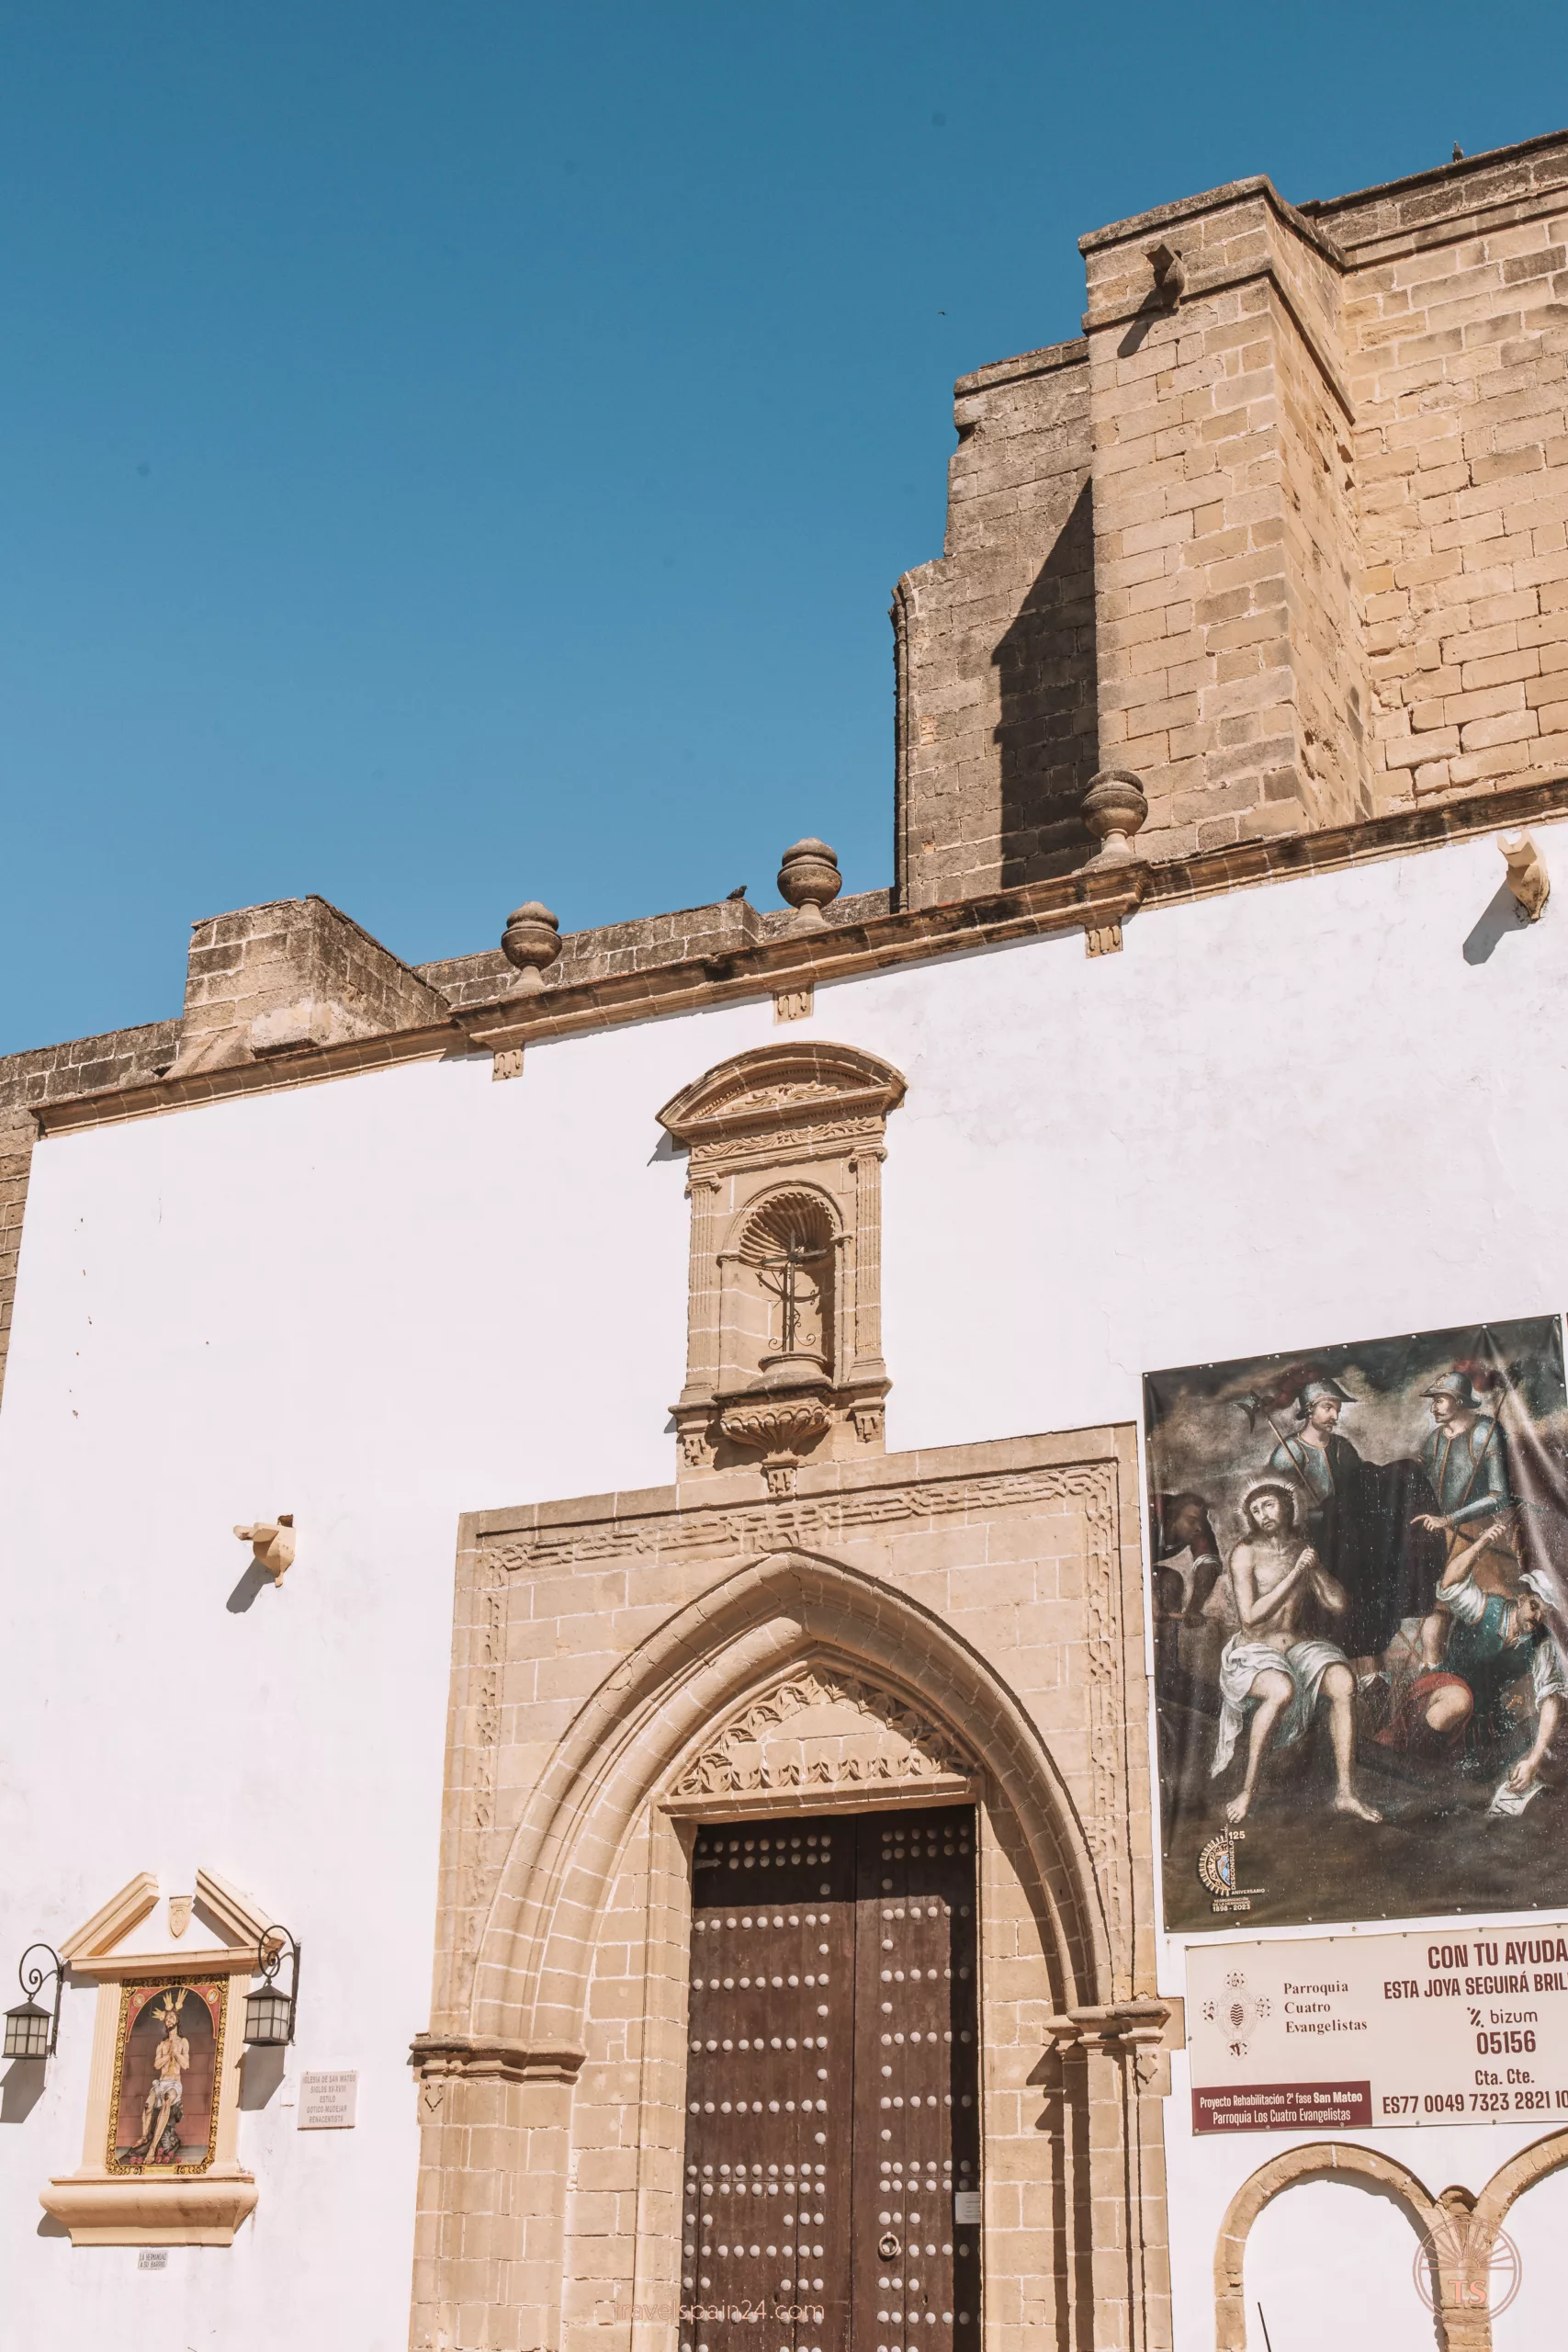 Entrance to Iglesia de San Mateo in Jerez de la Frontera, featuring the intricate doorway. This image relates to the post by showing one of the notable churches to visit in Jerez de la Frontera.